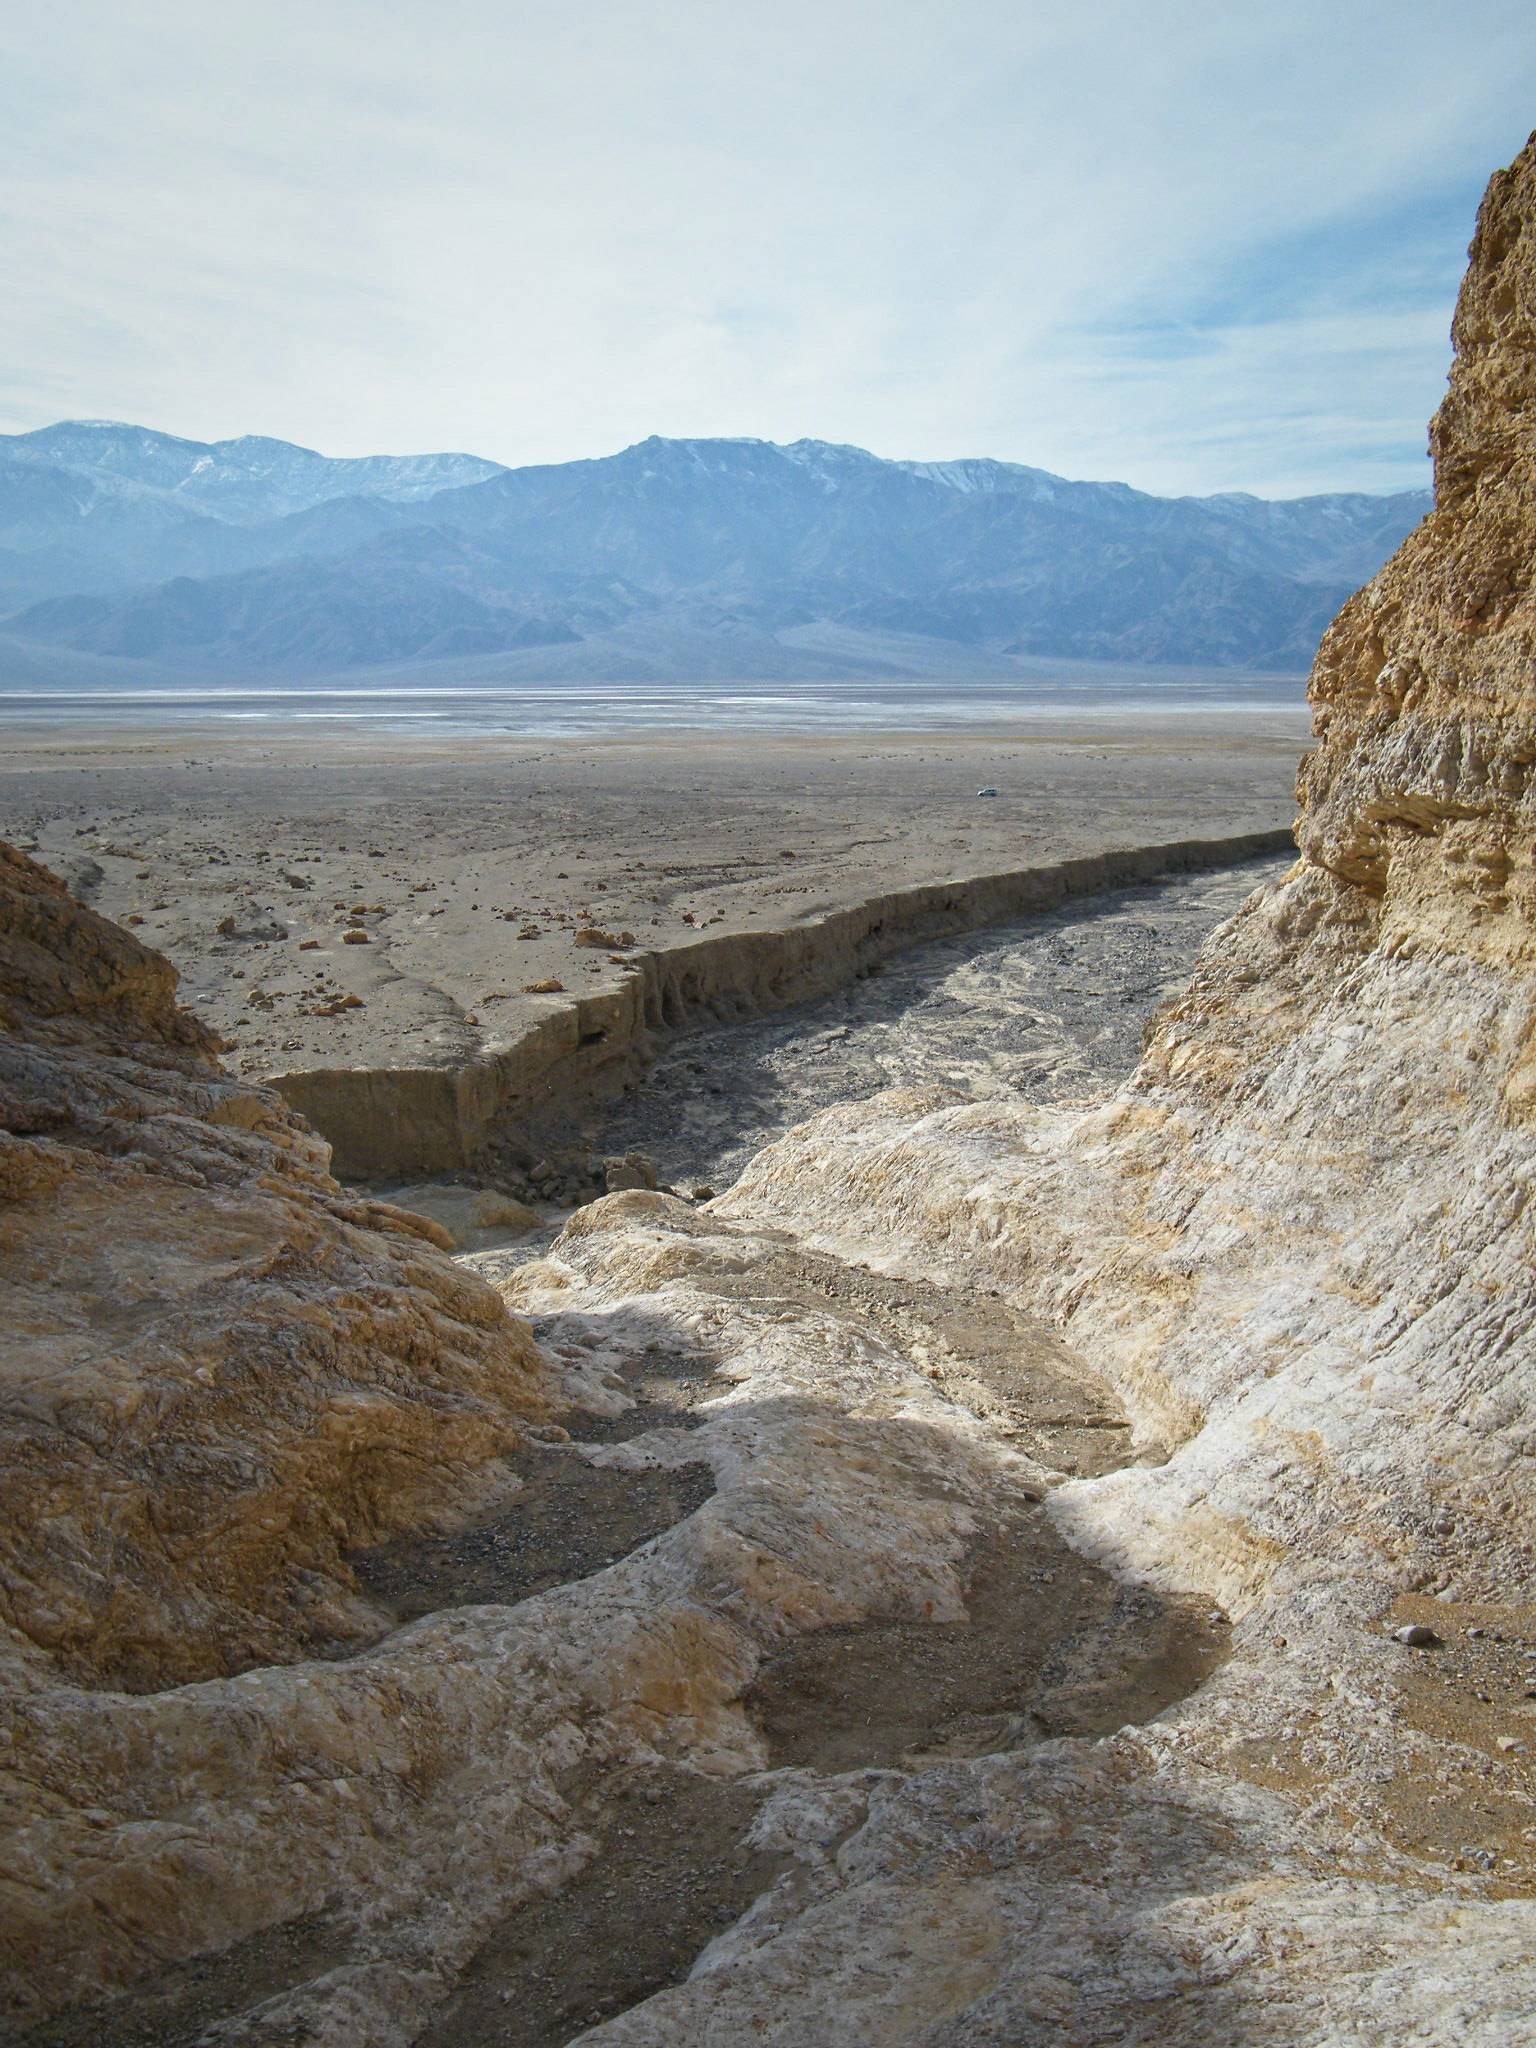 Views down Gower Gulch to Badwater Flats, Death Valley National Park, California